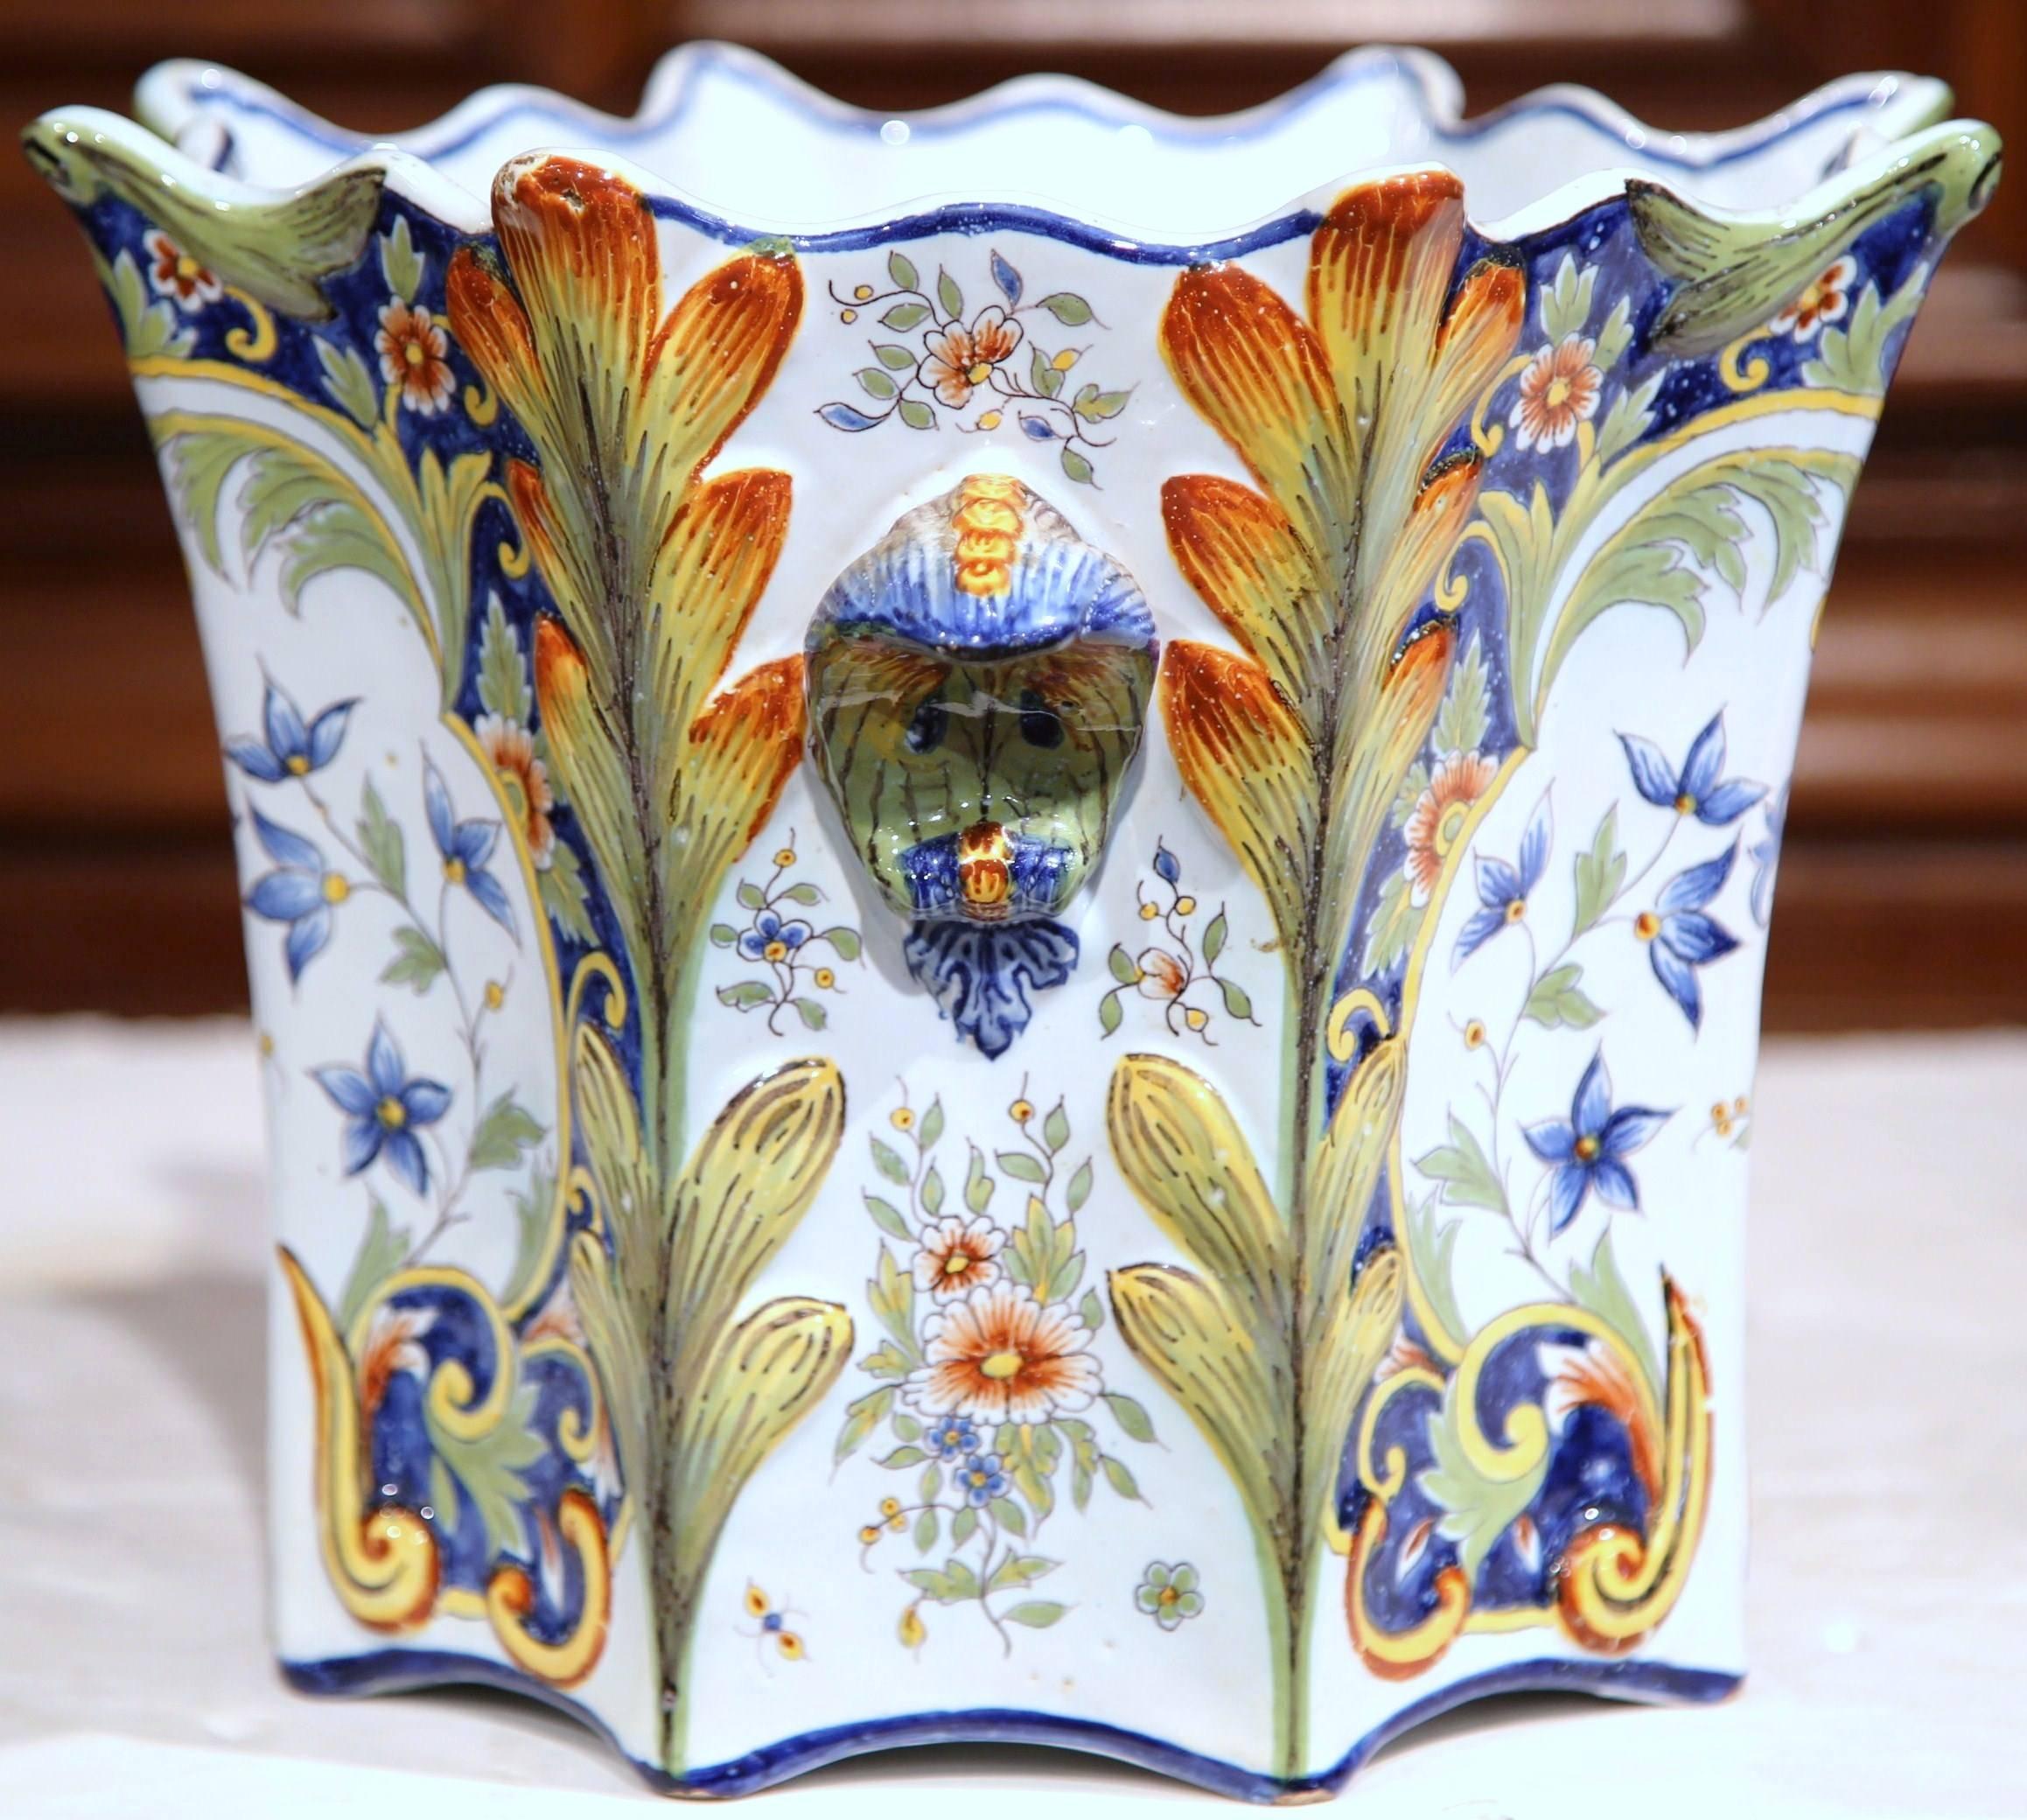 Decorate a mantle, table or buffet with this beautiful and colorful antique octagonal planter with handles. Sculpted in Normandy, France, circa 1880, the porcelain cache-pot has a playful, unique shape and a beautiful palette of rich colors.